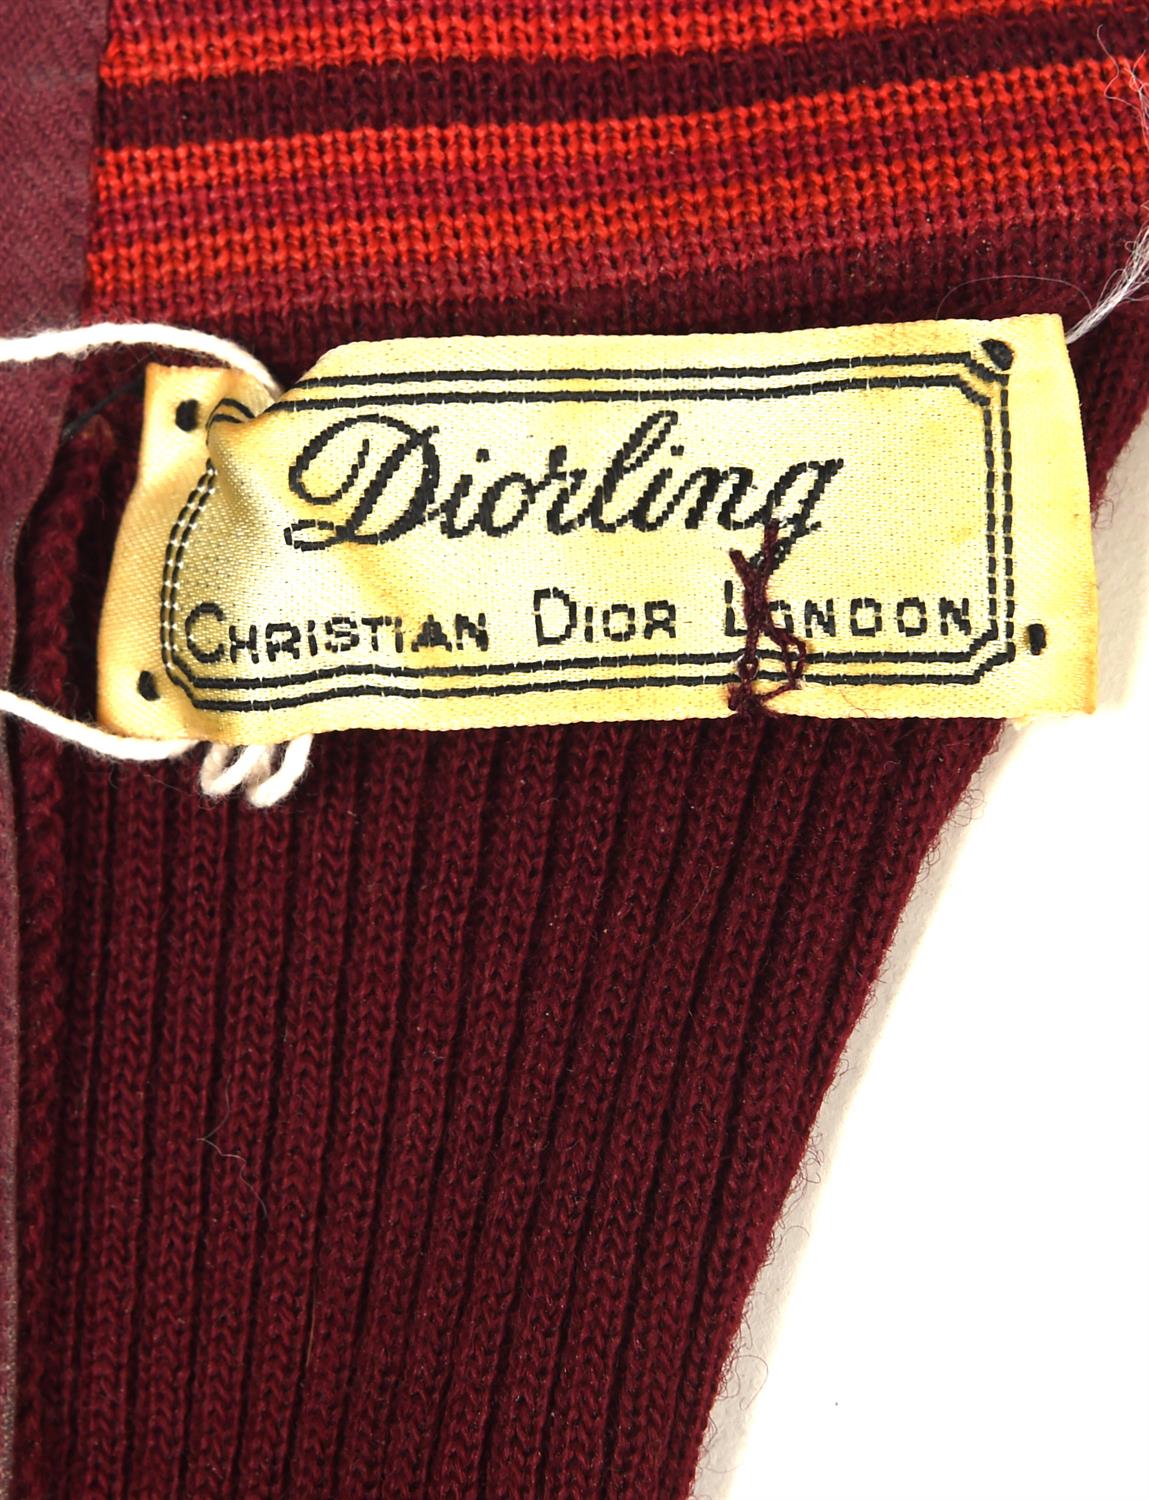 CHRISTIAN DIOR DIORLING 1970s knitted wool dress in burgundy and orange. Fits UK10 * CHRISTIAN DIOR - Image 5 of 13